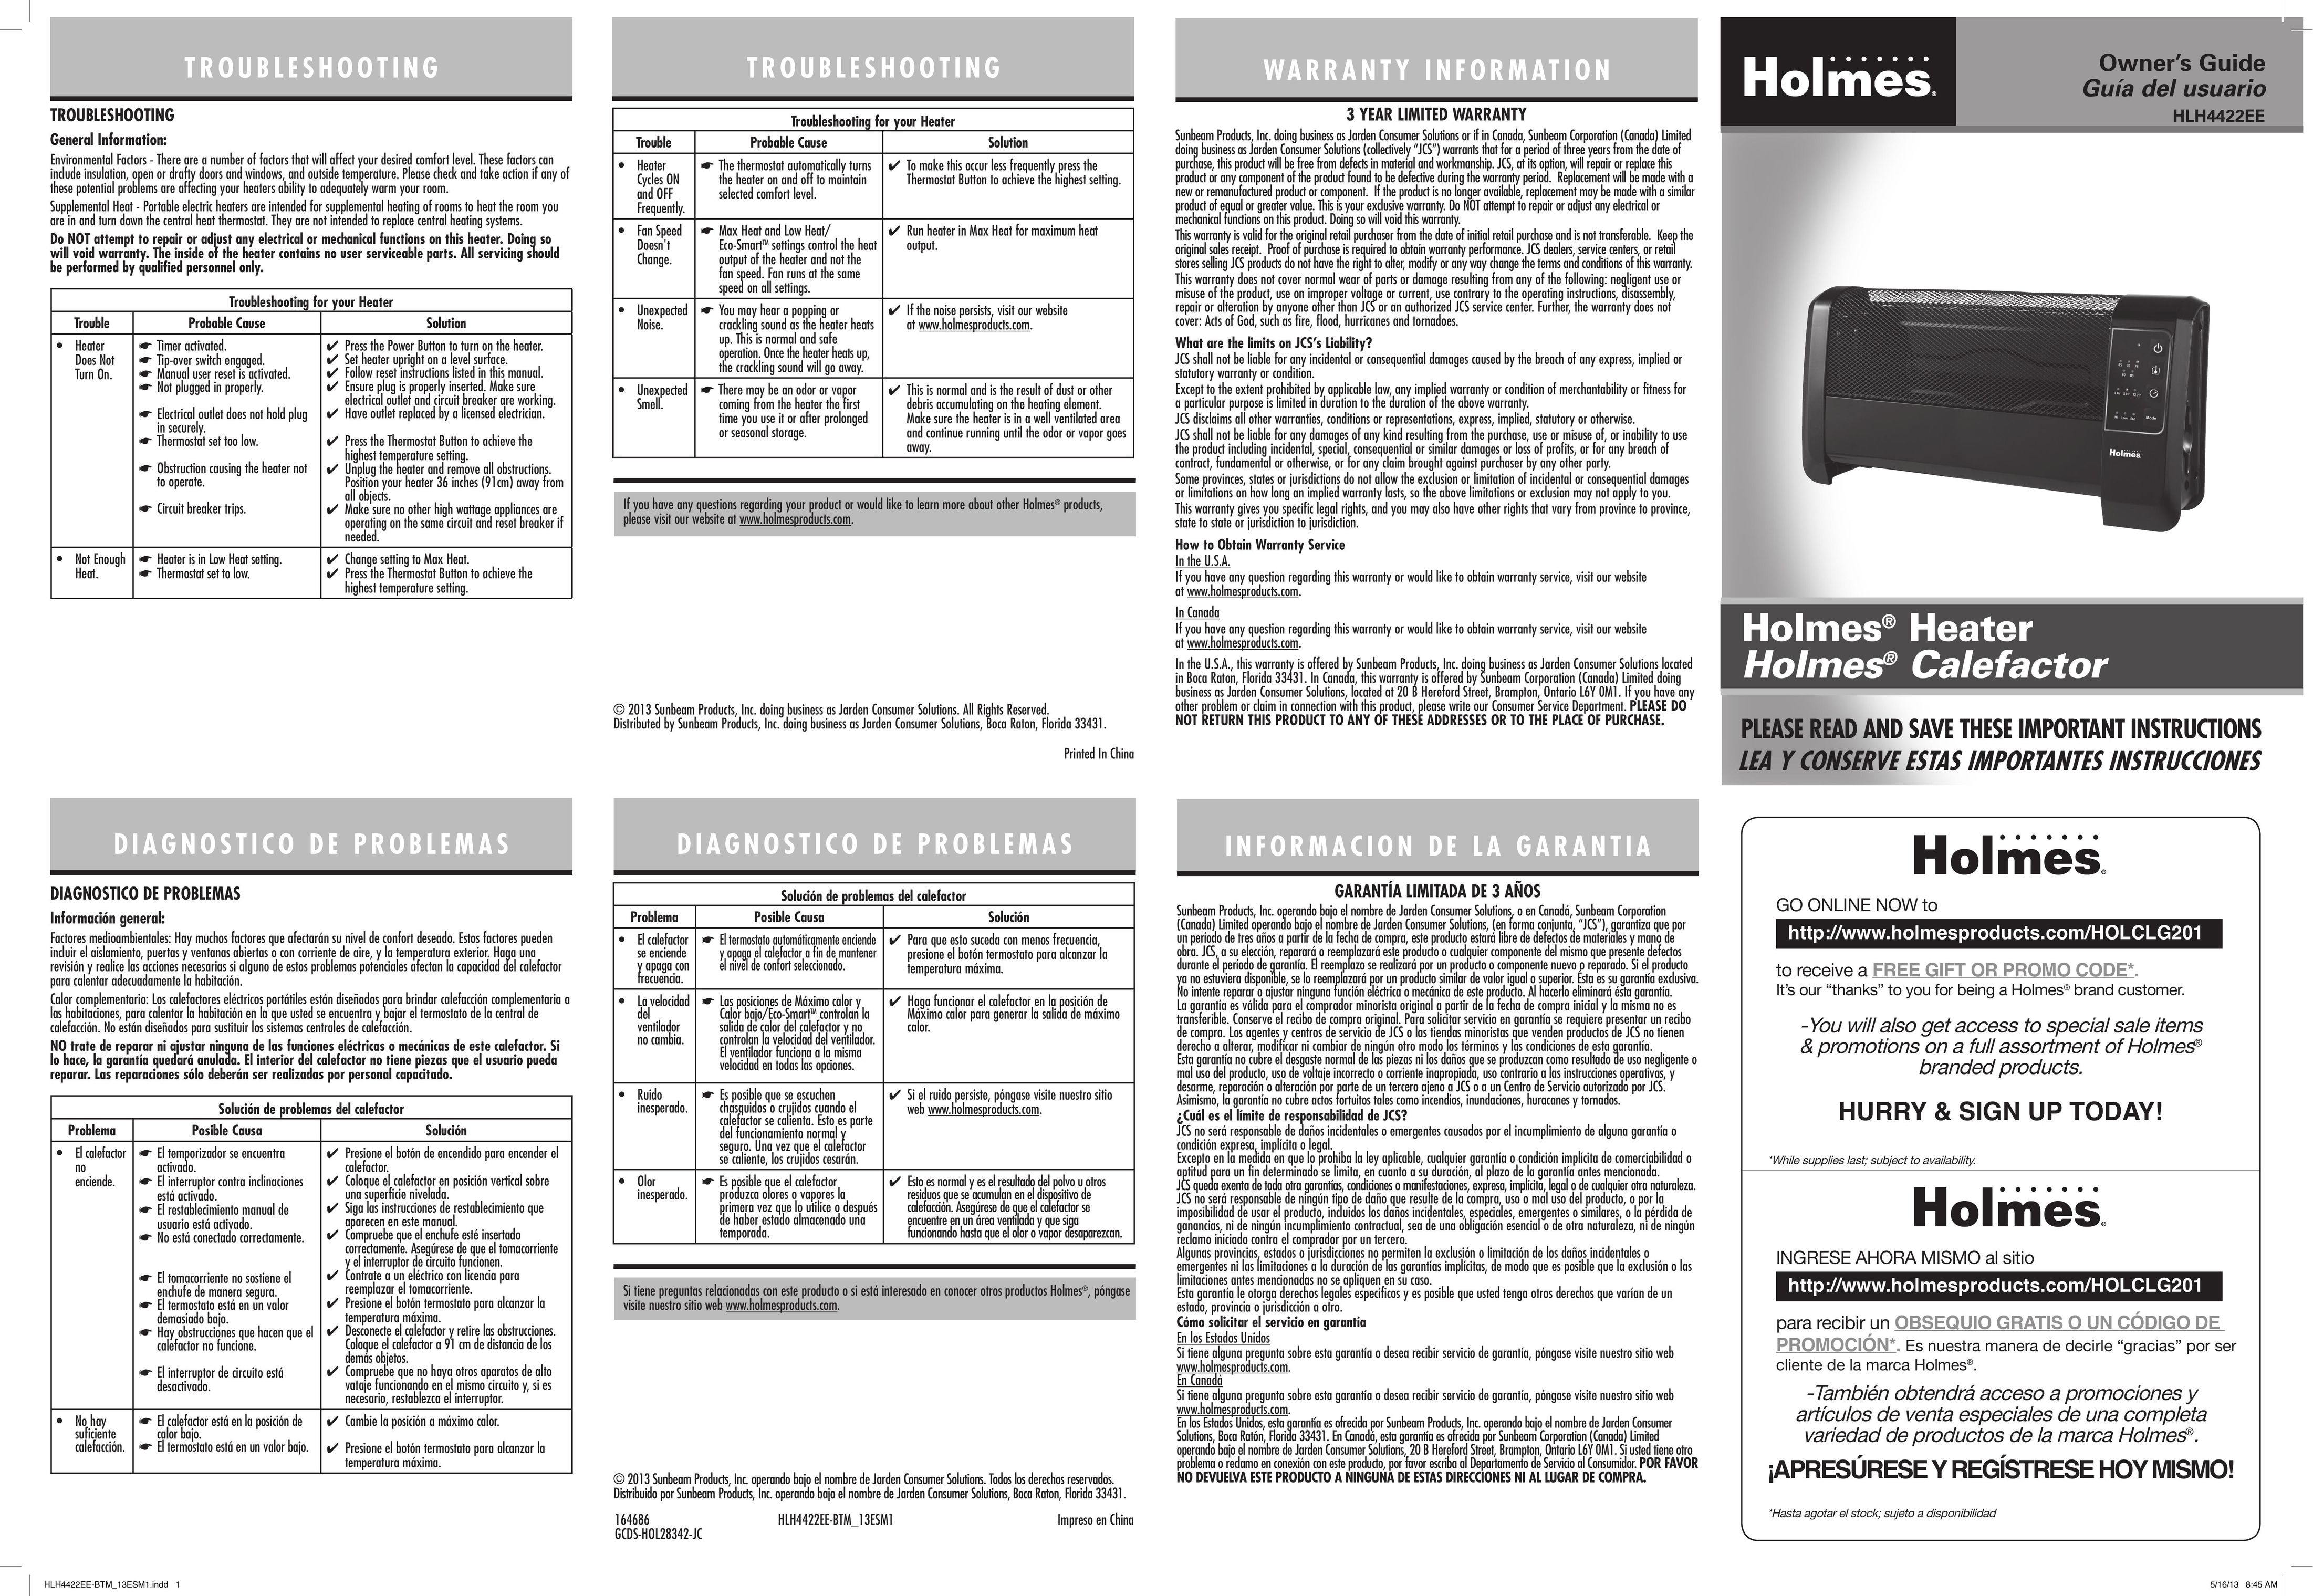 Holmes HLH4422EE Air Conditioner User Manual